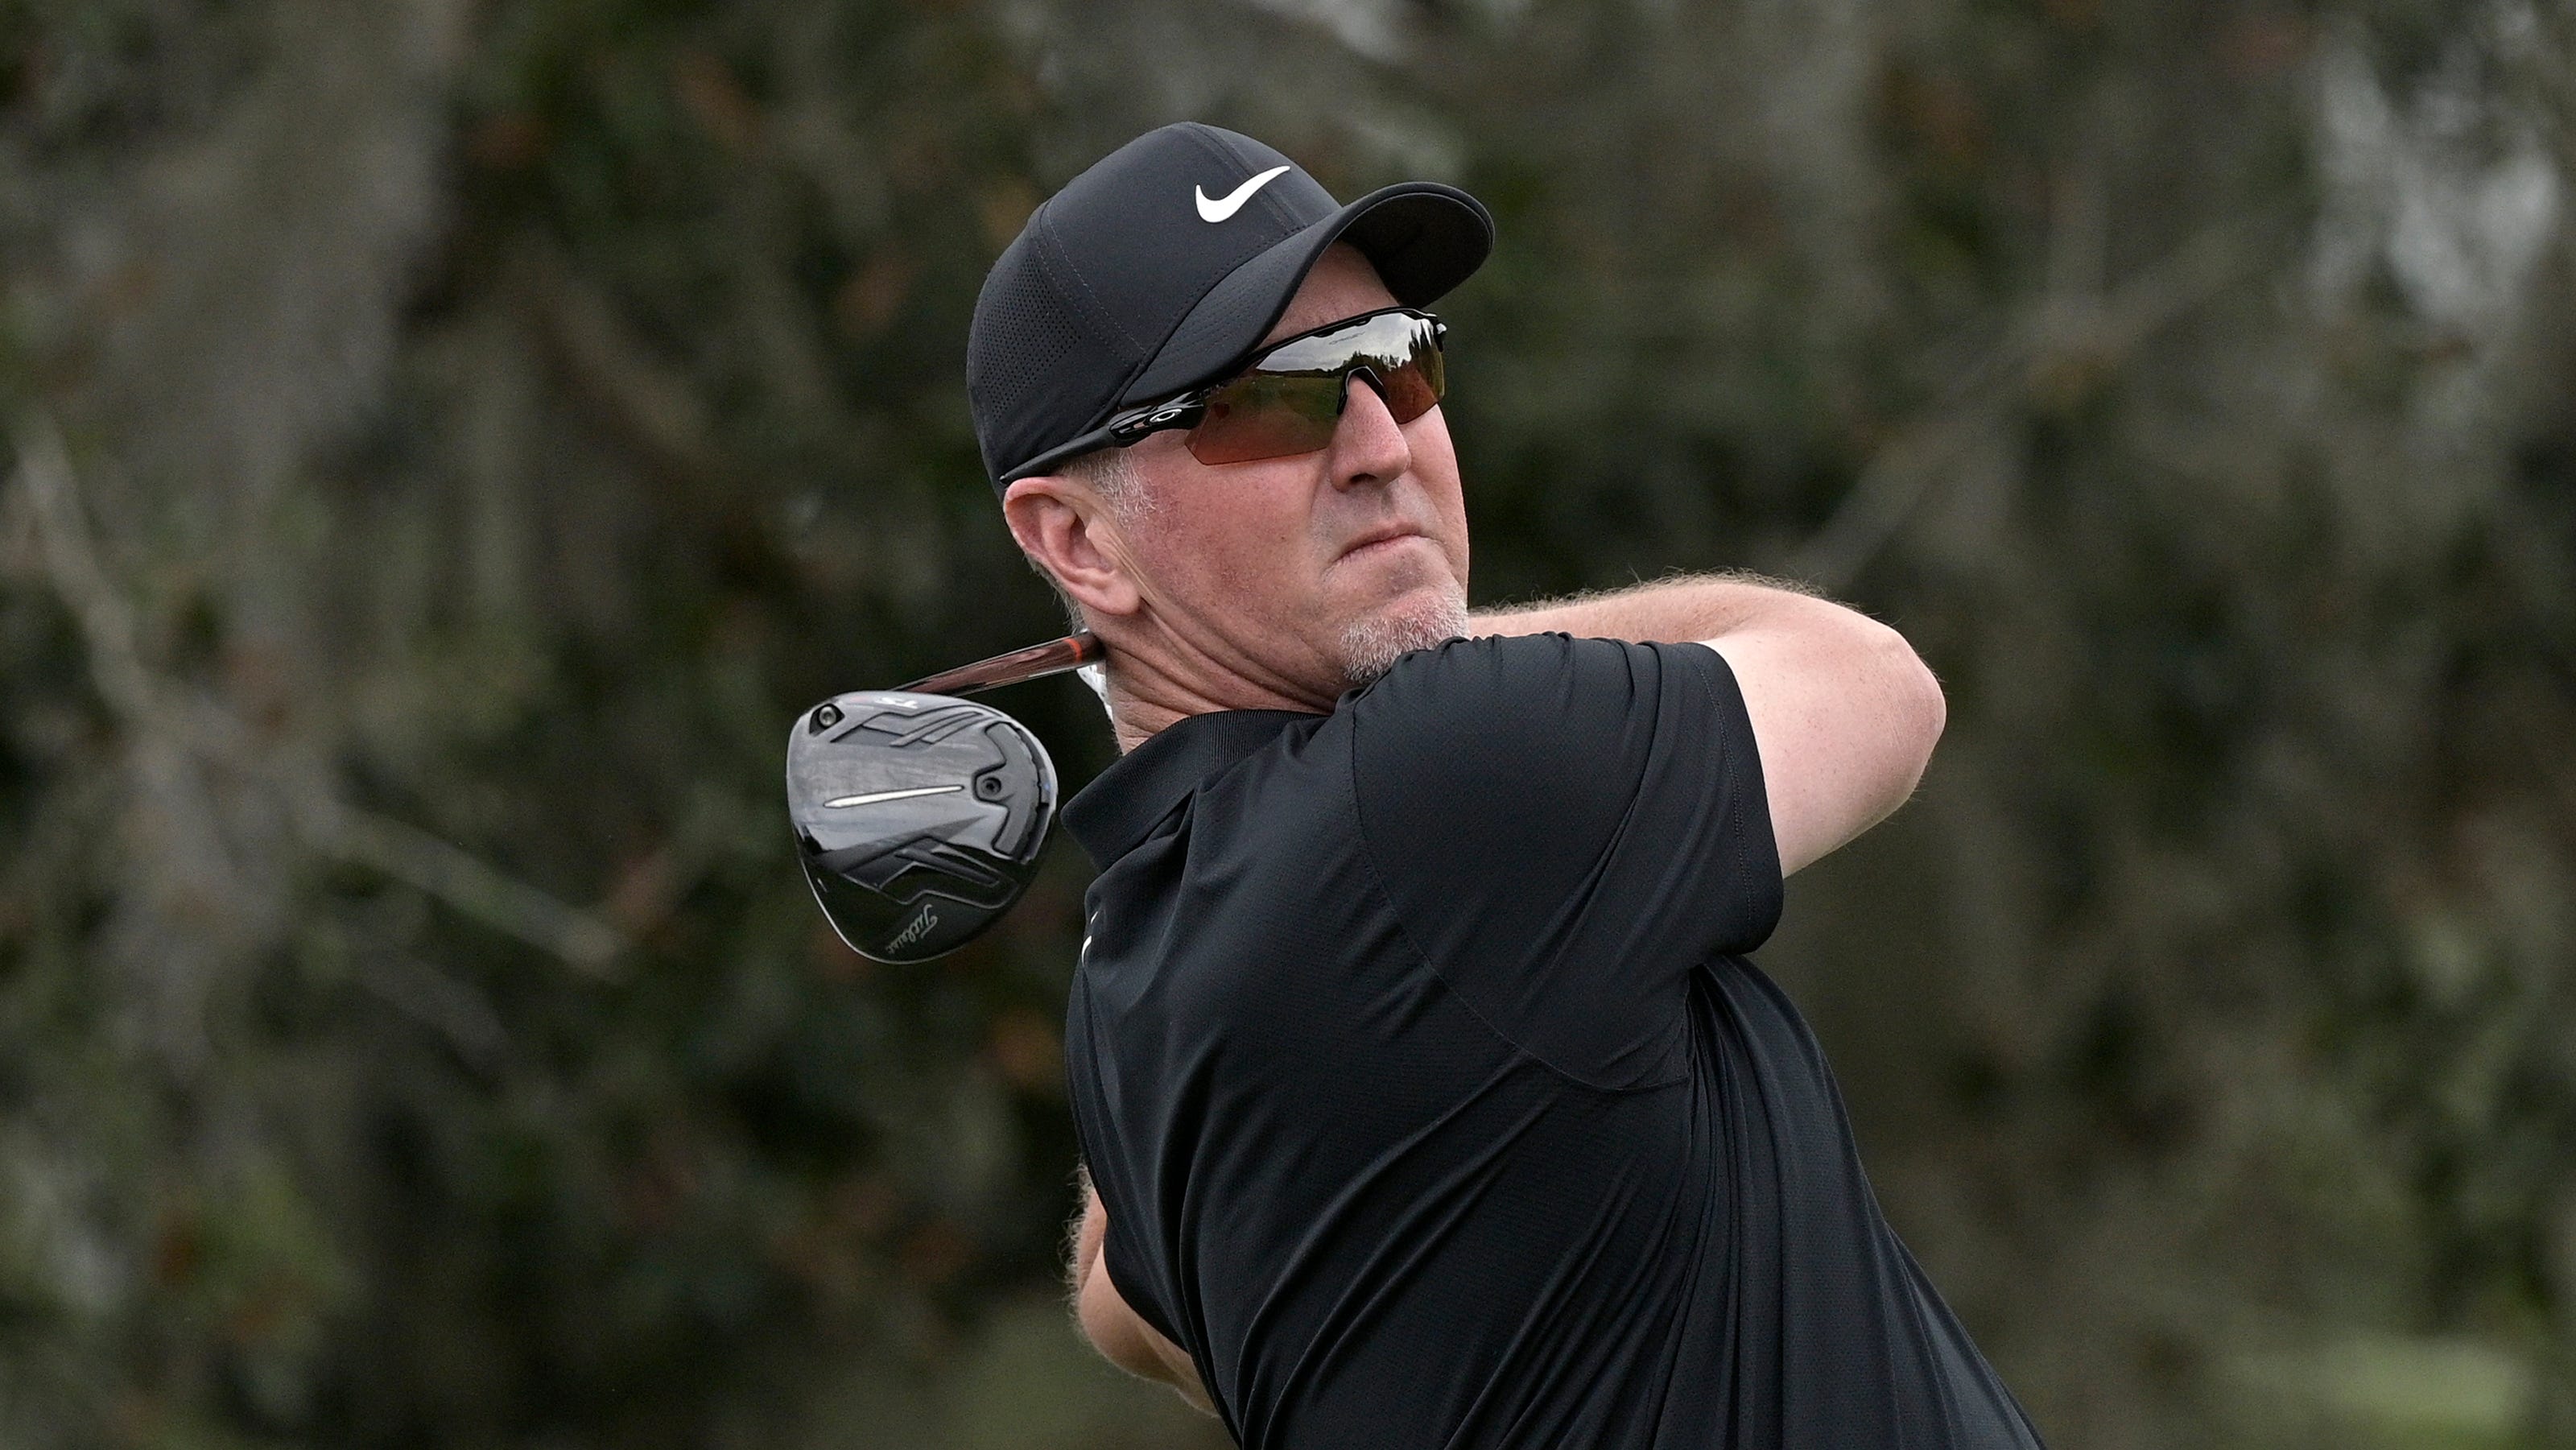 Ian aside, Furyk & Friends ready for a star-studded week at the Timuquana Country Club